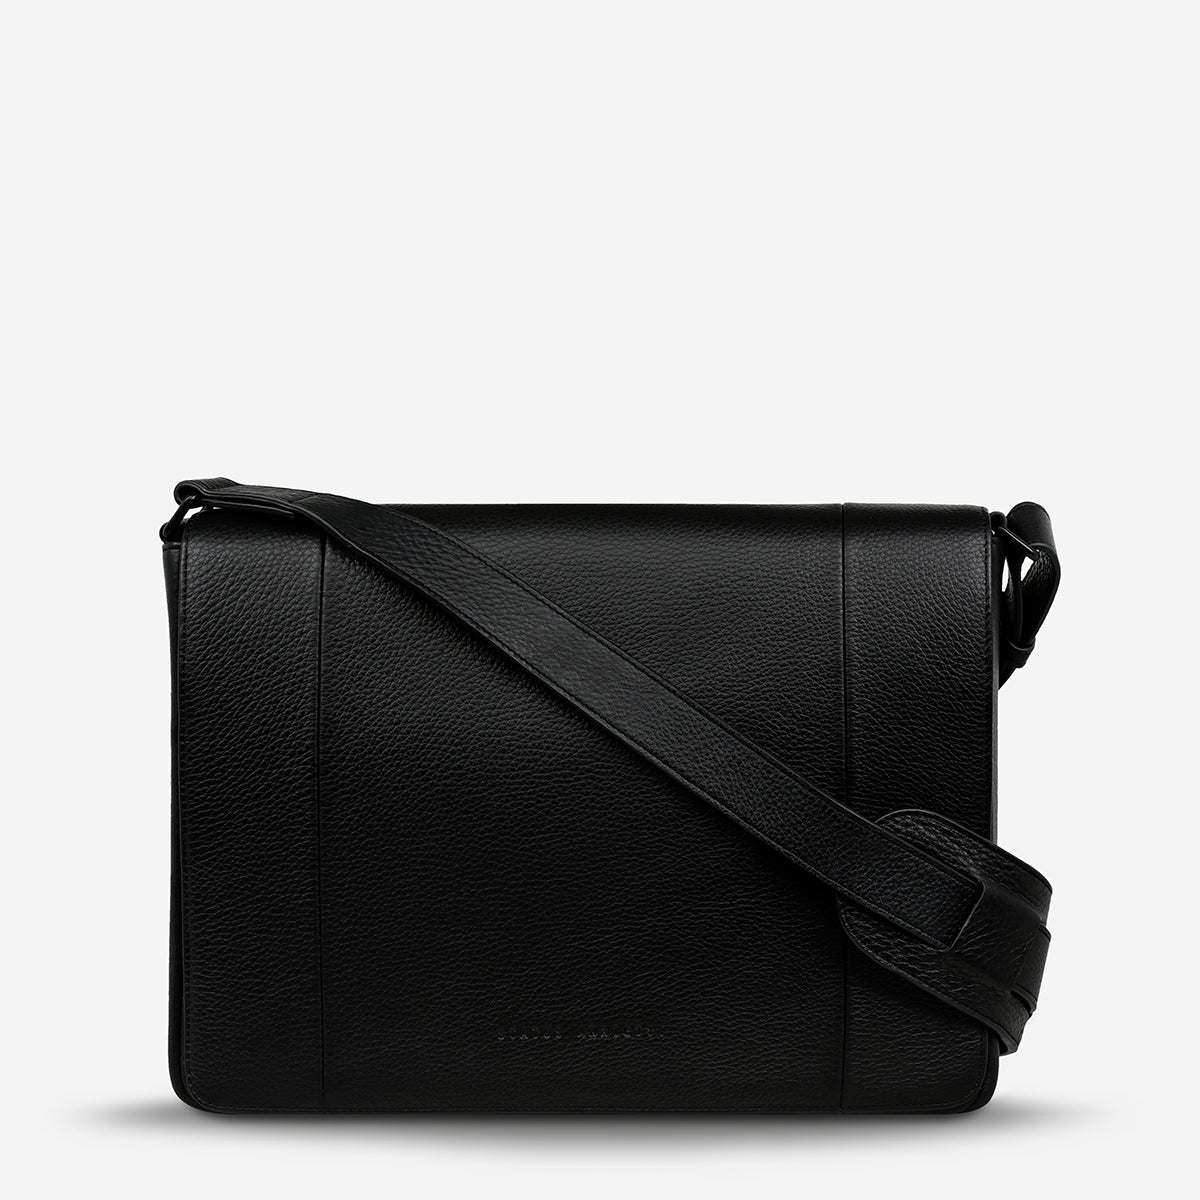 Women's Leather Bags | The Leather Satchel Co.